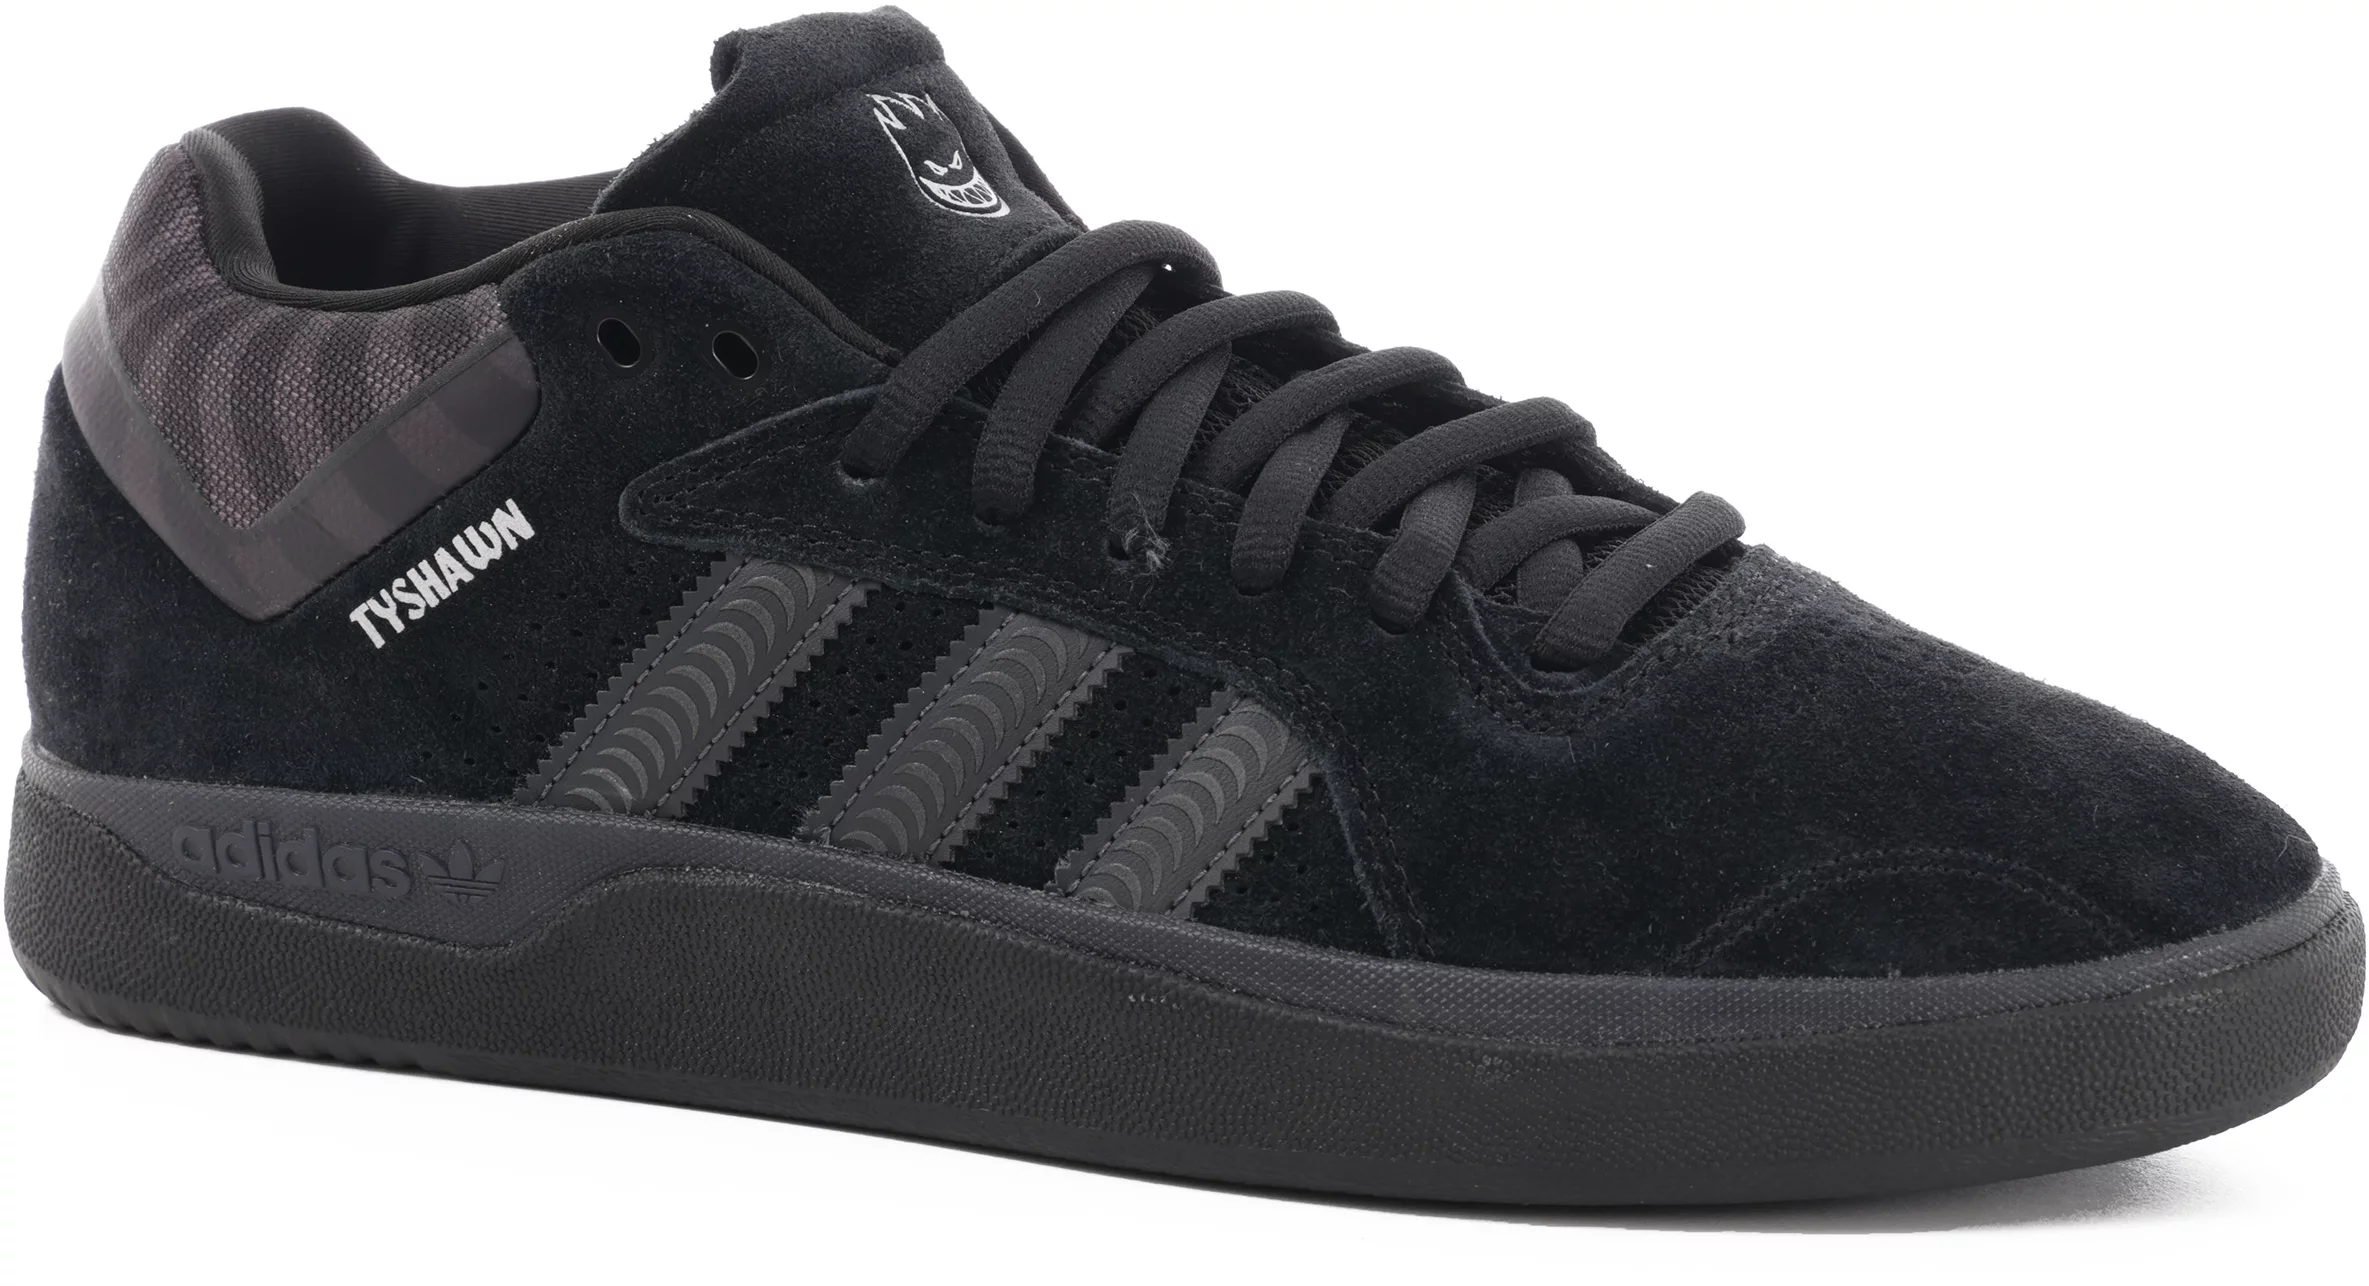 Adidas Tyshawn Pro Skate Shoes (spitfire) core black/grey five/silver - Free Shipping | Tactics